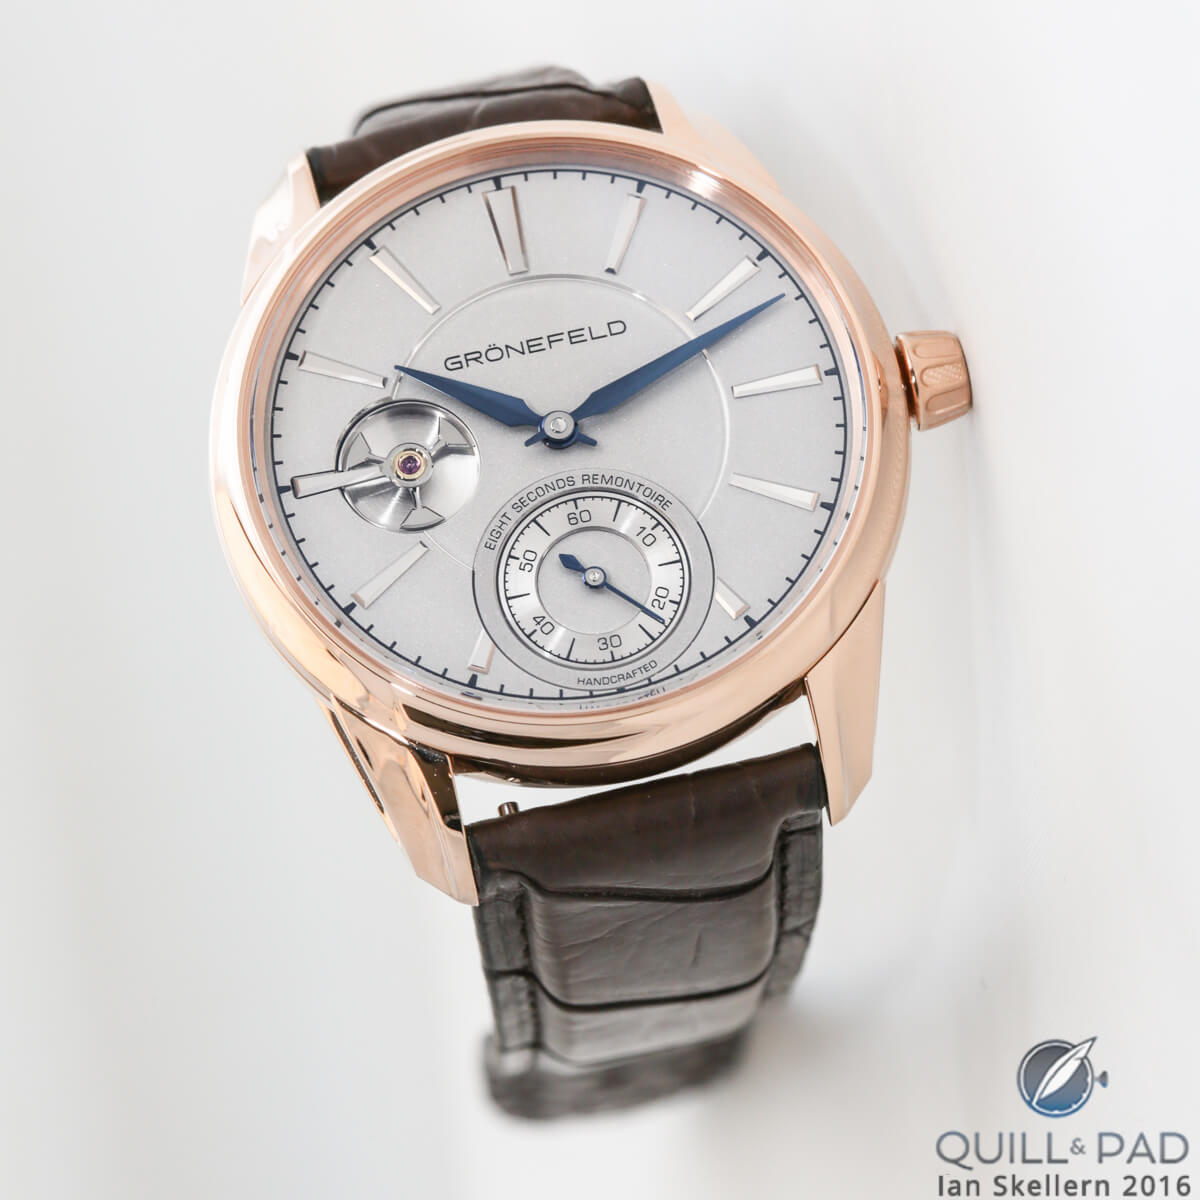 Grönefeld 1941 Remontoire in red gold with frosted sterling silver dial